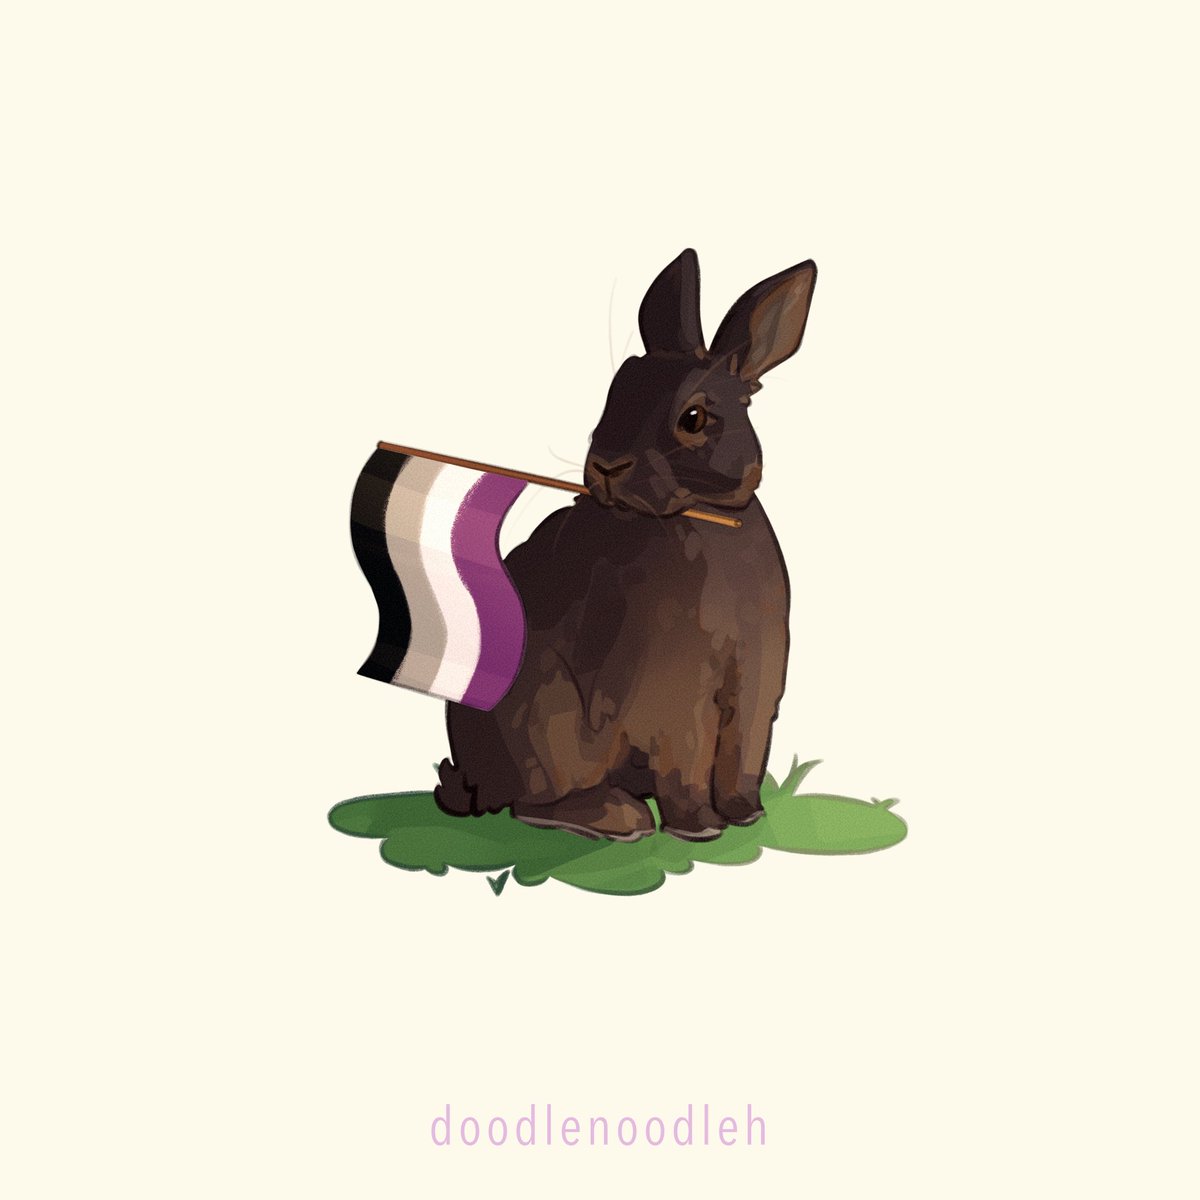 The last set of pride bunnies (for now) 🥕